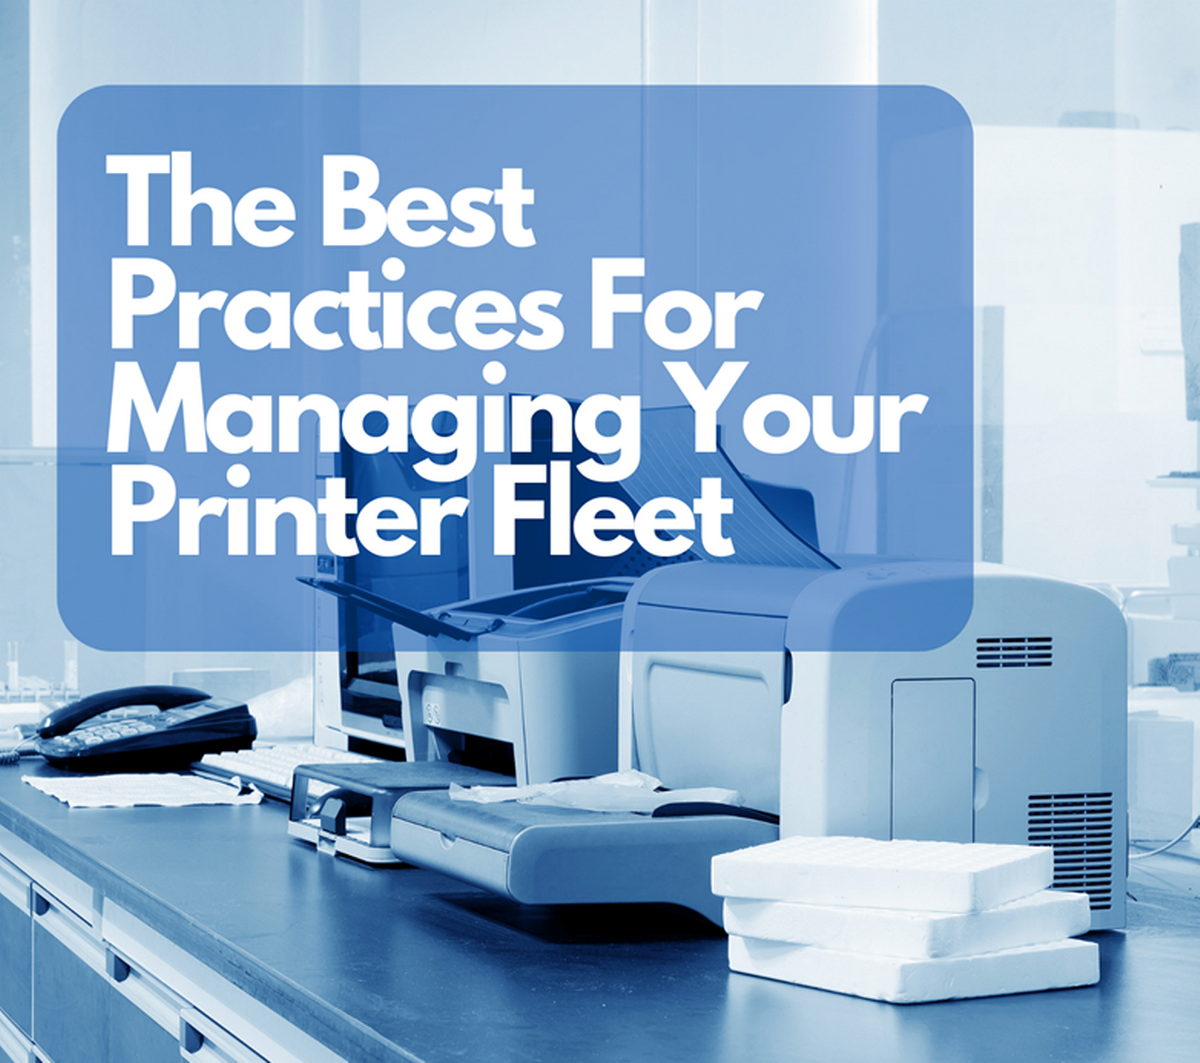 The Best Practices for Managing Your Printer Fleet